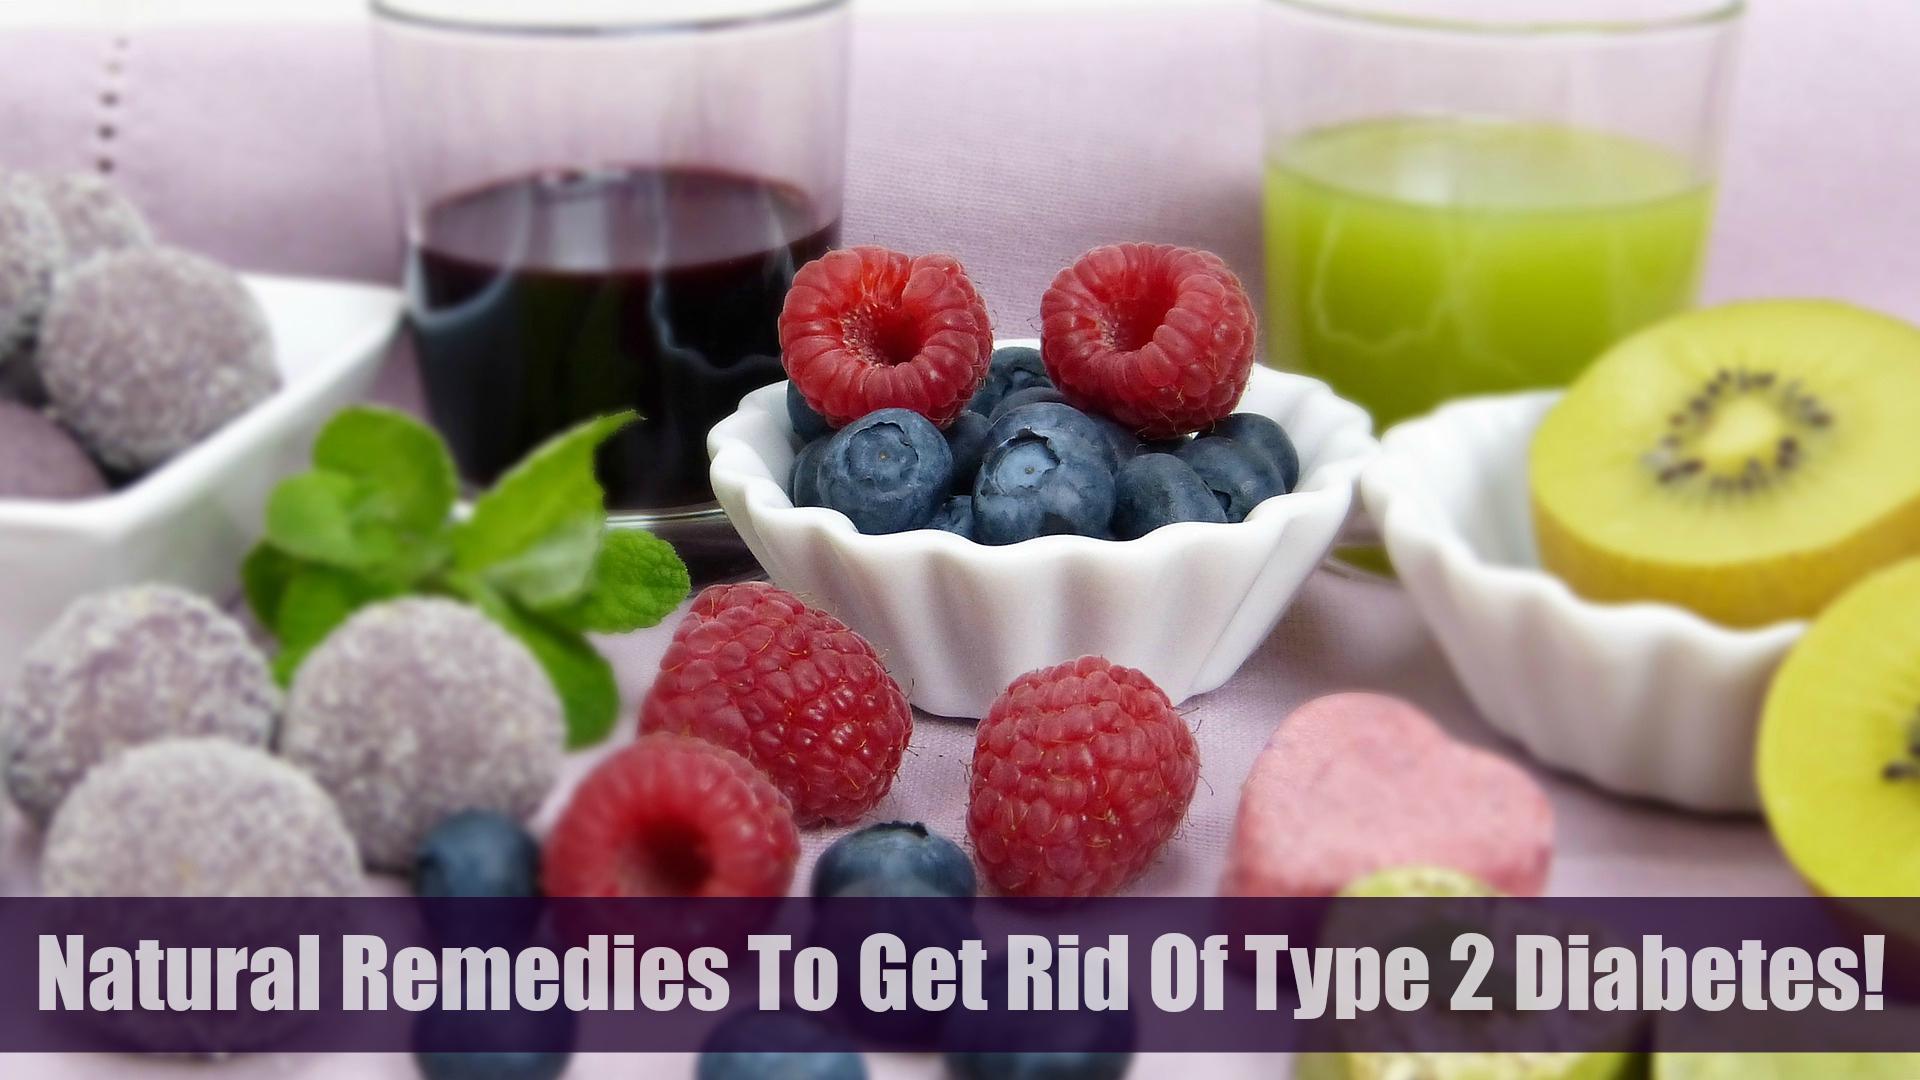 8 Best Natural Remedies For Type 2 Diabetes 2022